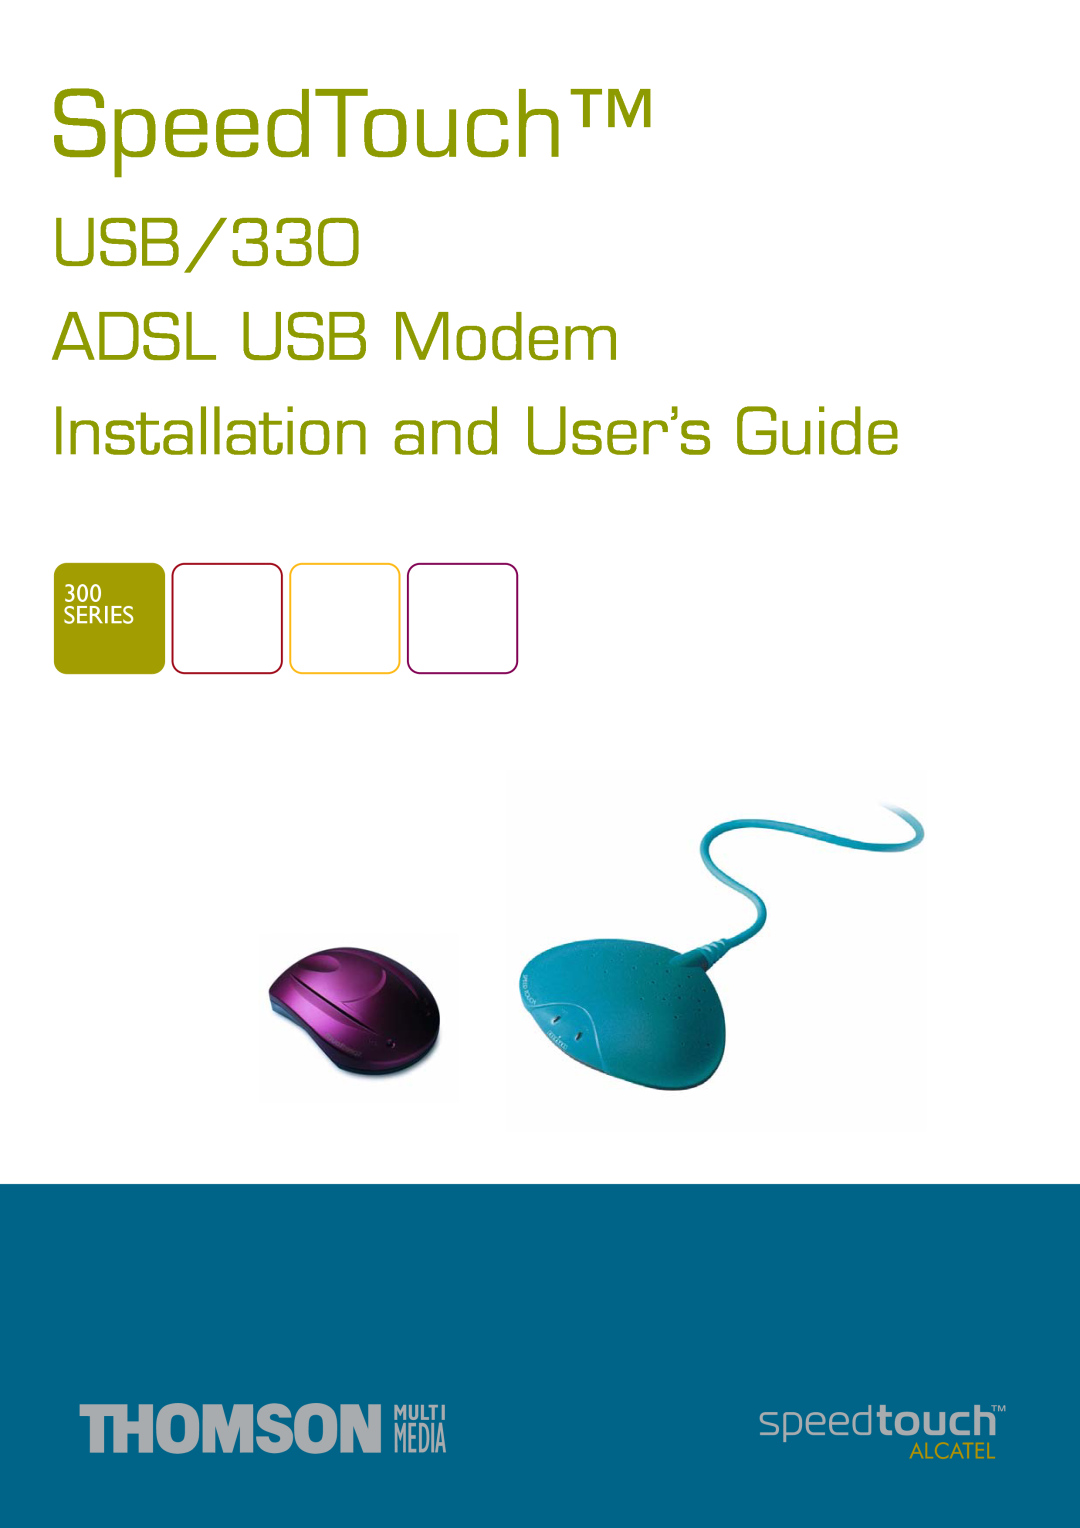 RCA 300 manual Series, SpeedTouch, USB/330 ADSL USB Modem Installation and User’s Guide 